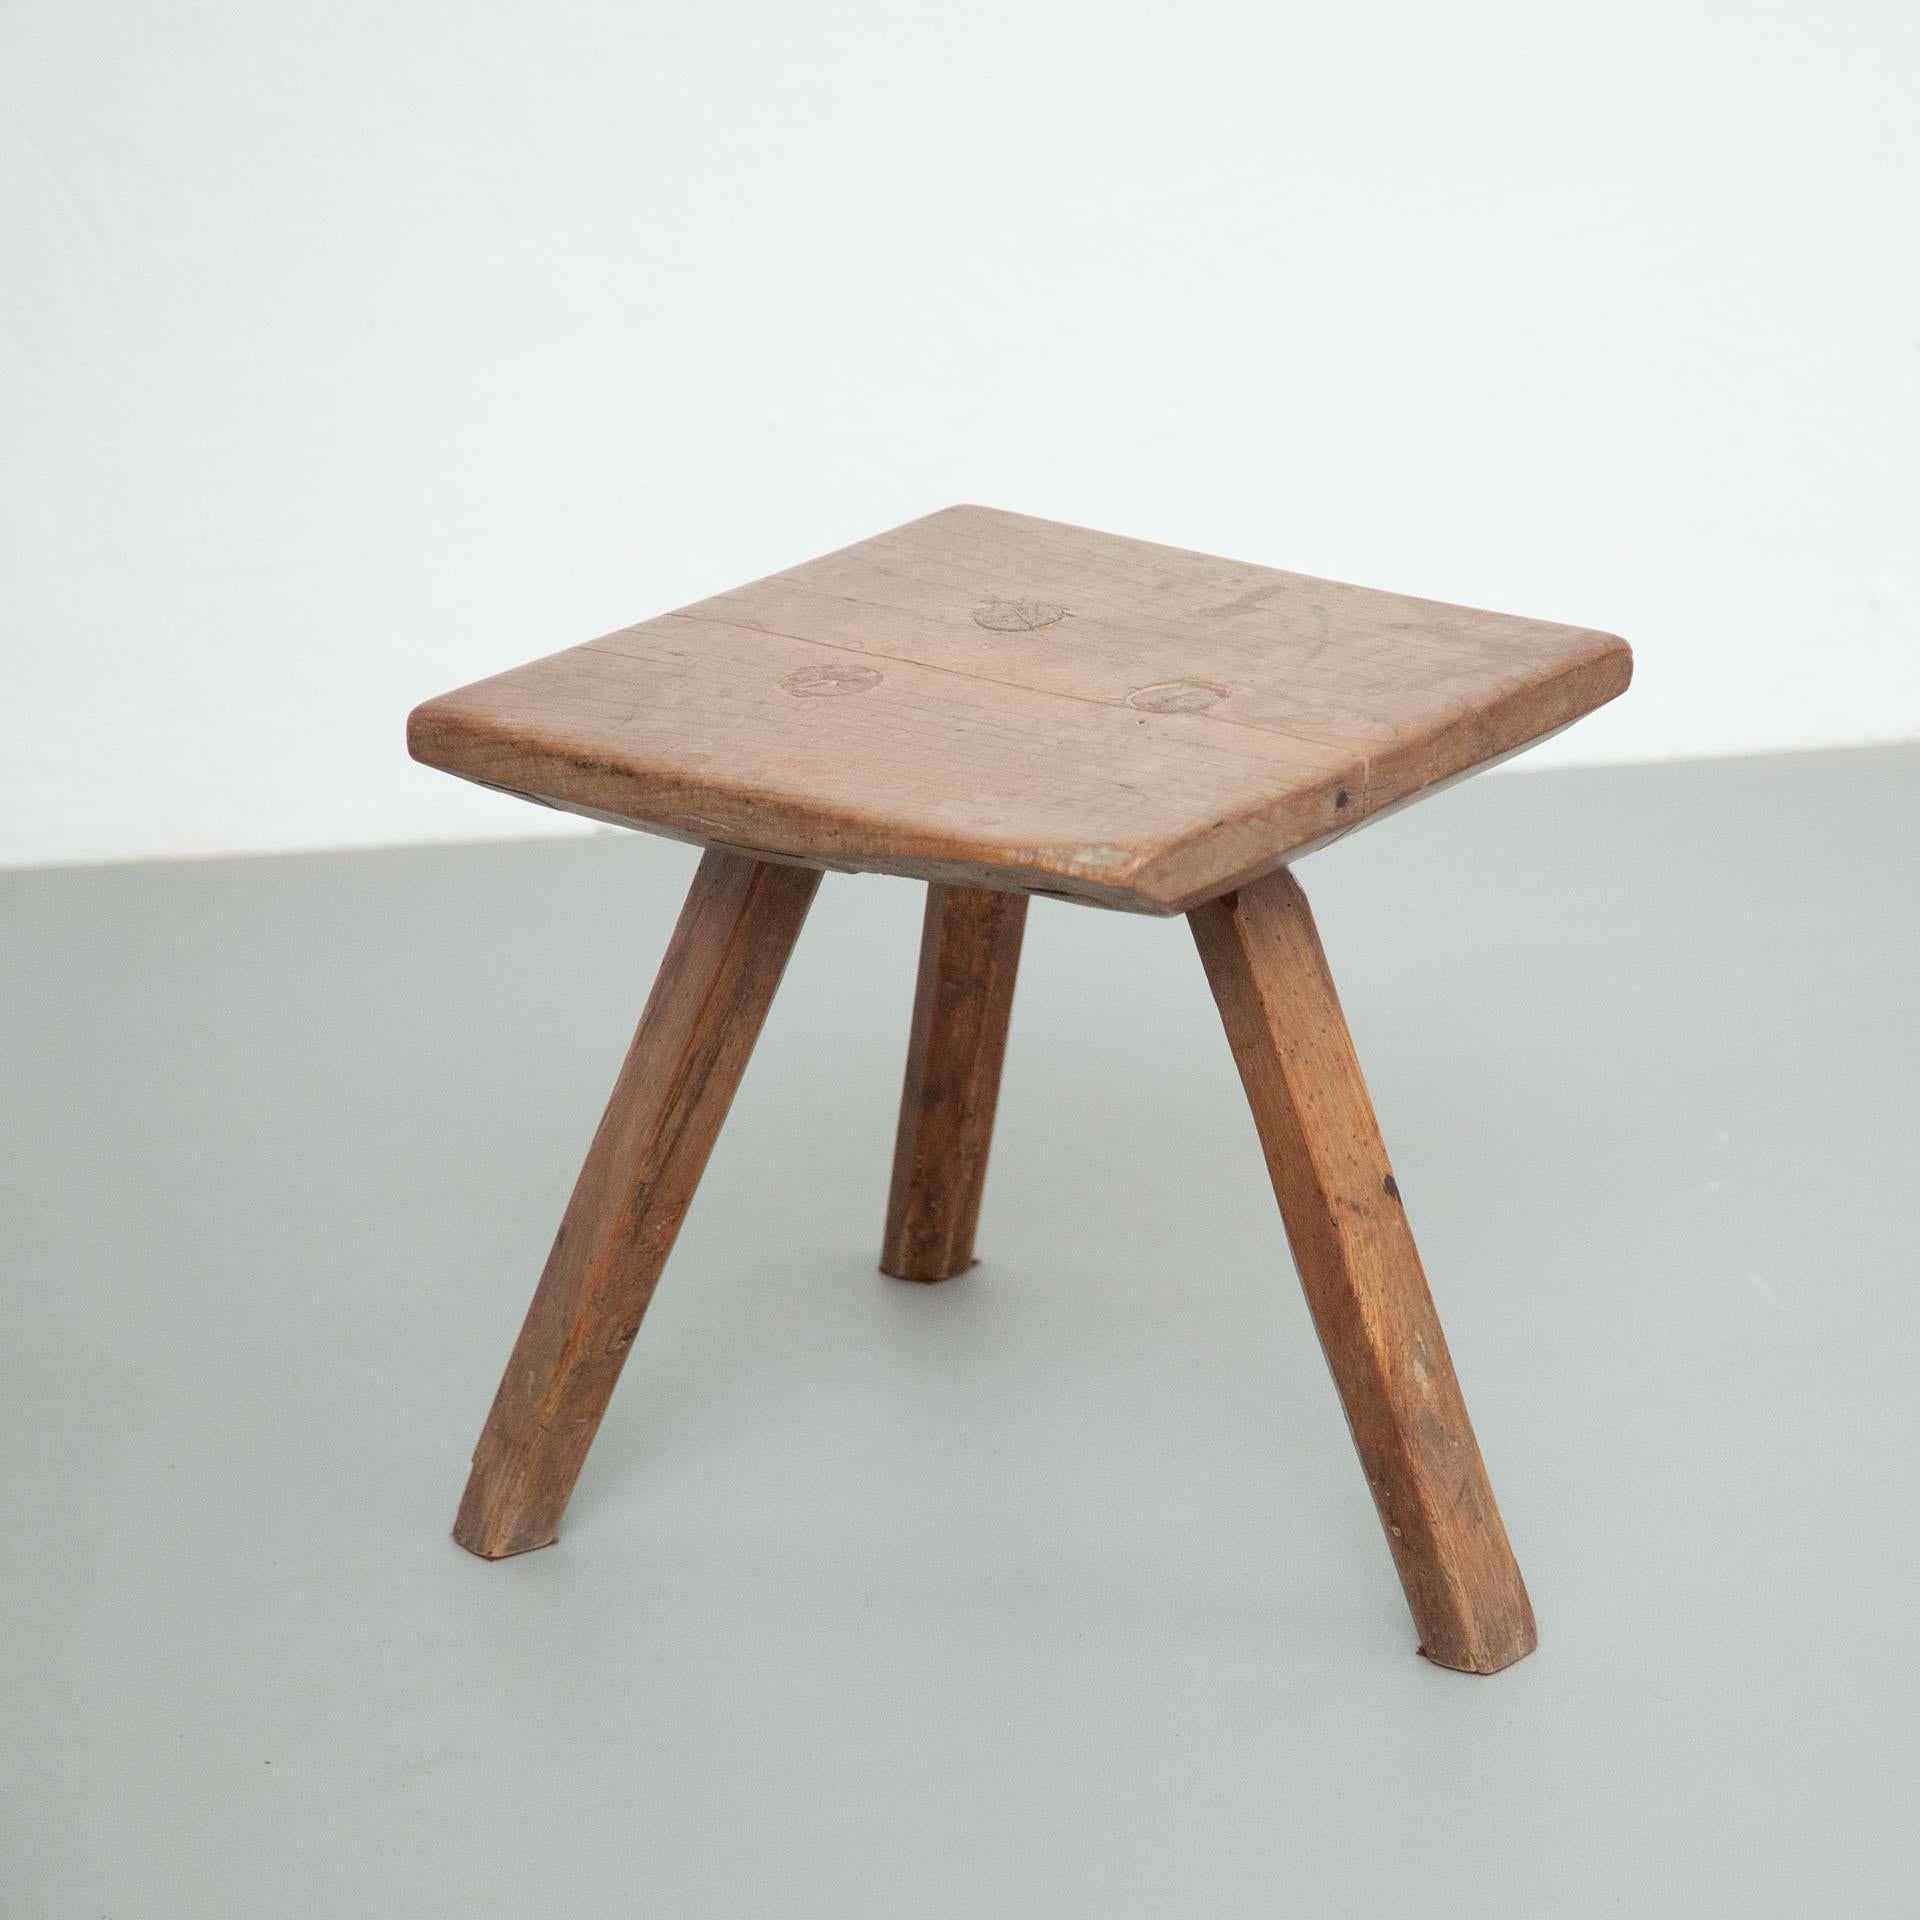 Rustic French stool.
By unknown manufacturer from France, circa 1930.

In original condition, with minor wear consistent with age and use, preserving a beautiful patina.

Material:
Wood.

  